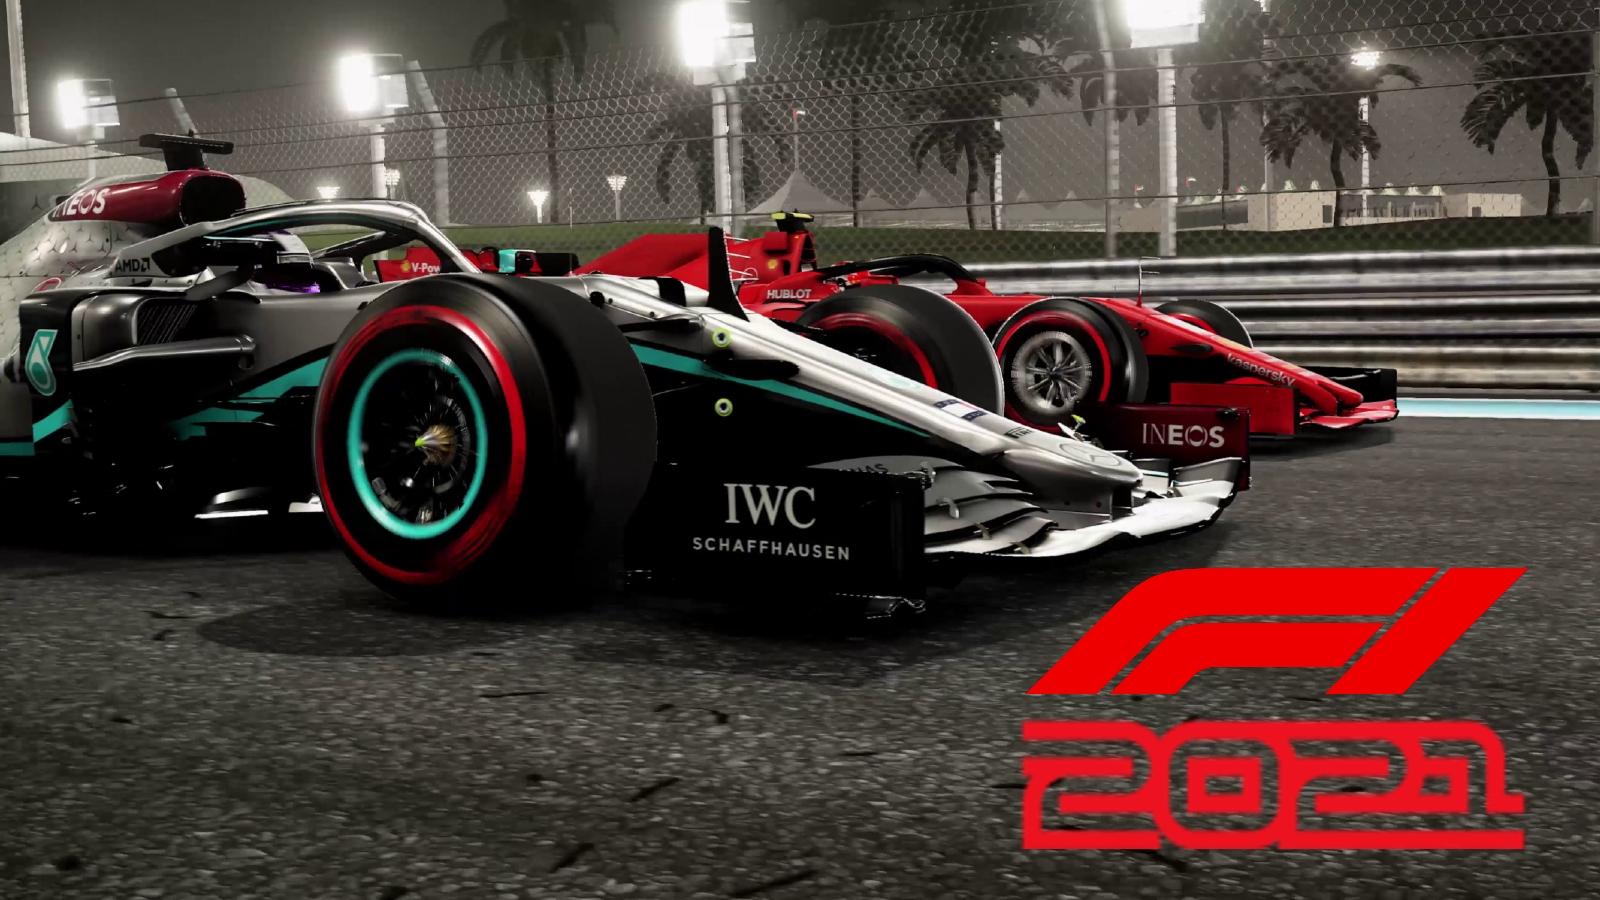 F1 2021 release date, trailers, my team and more